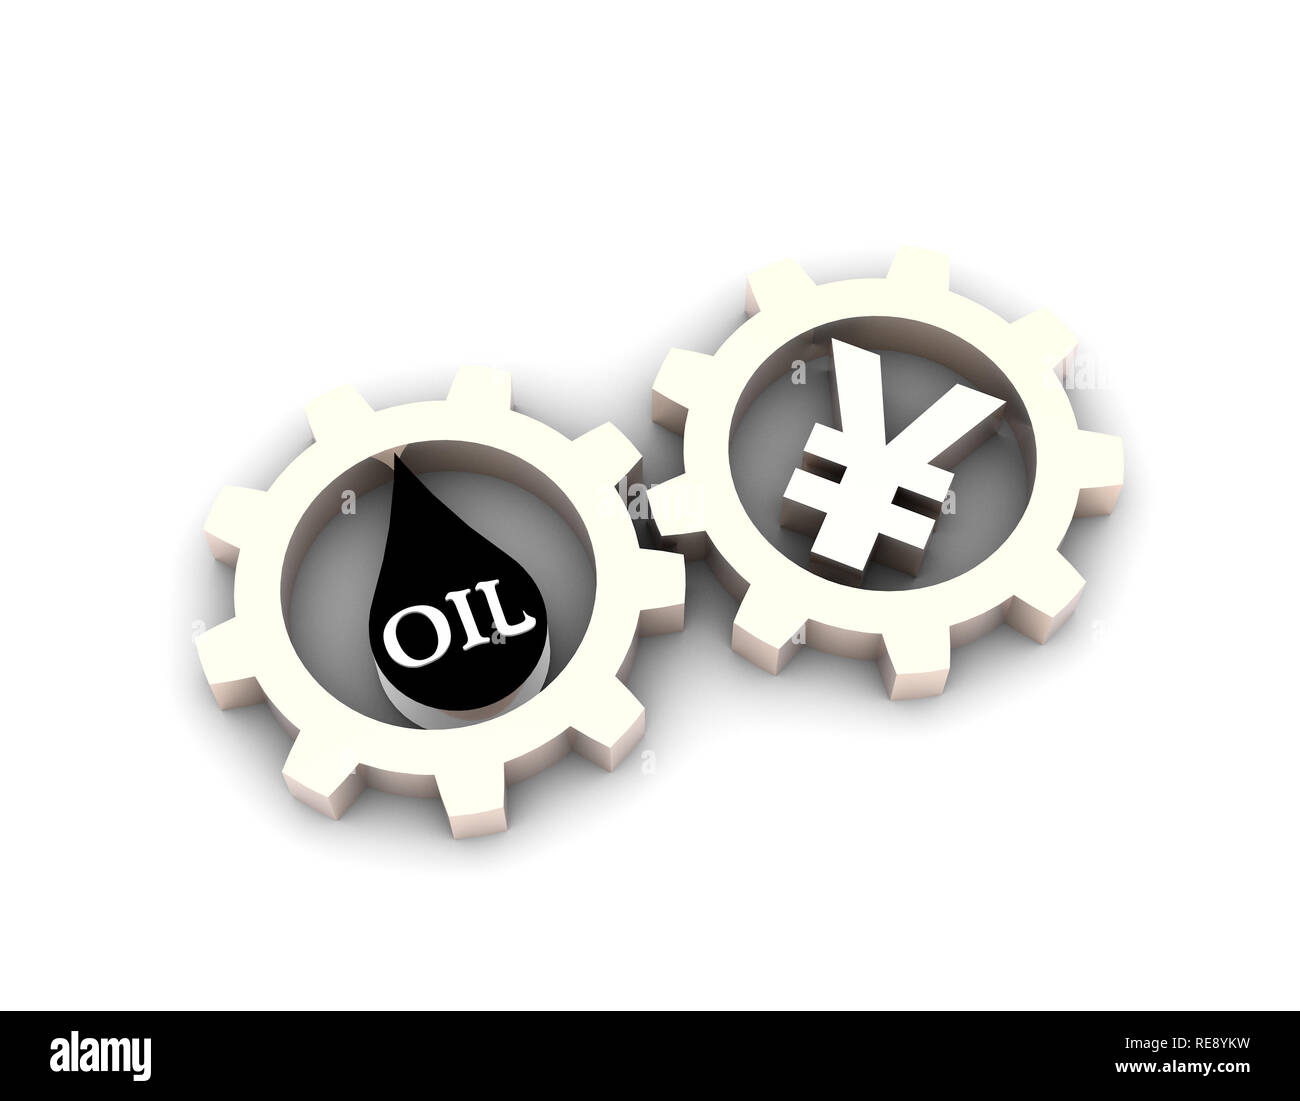 Exchange of RMB and oil, oil and renminbi, energy money, currency symbols and gears Stock Photo